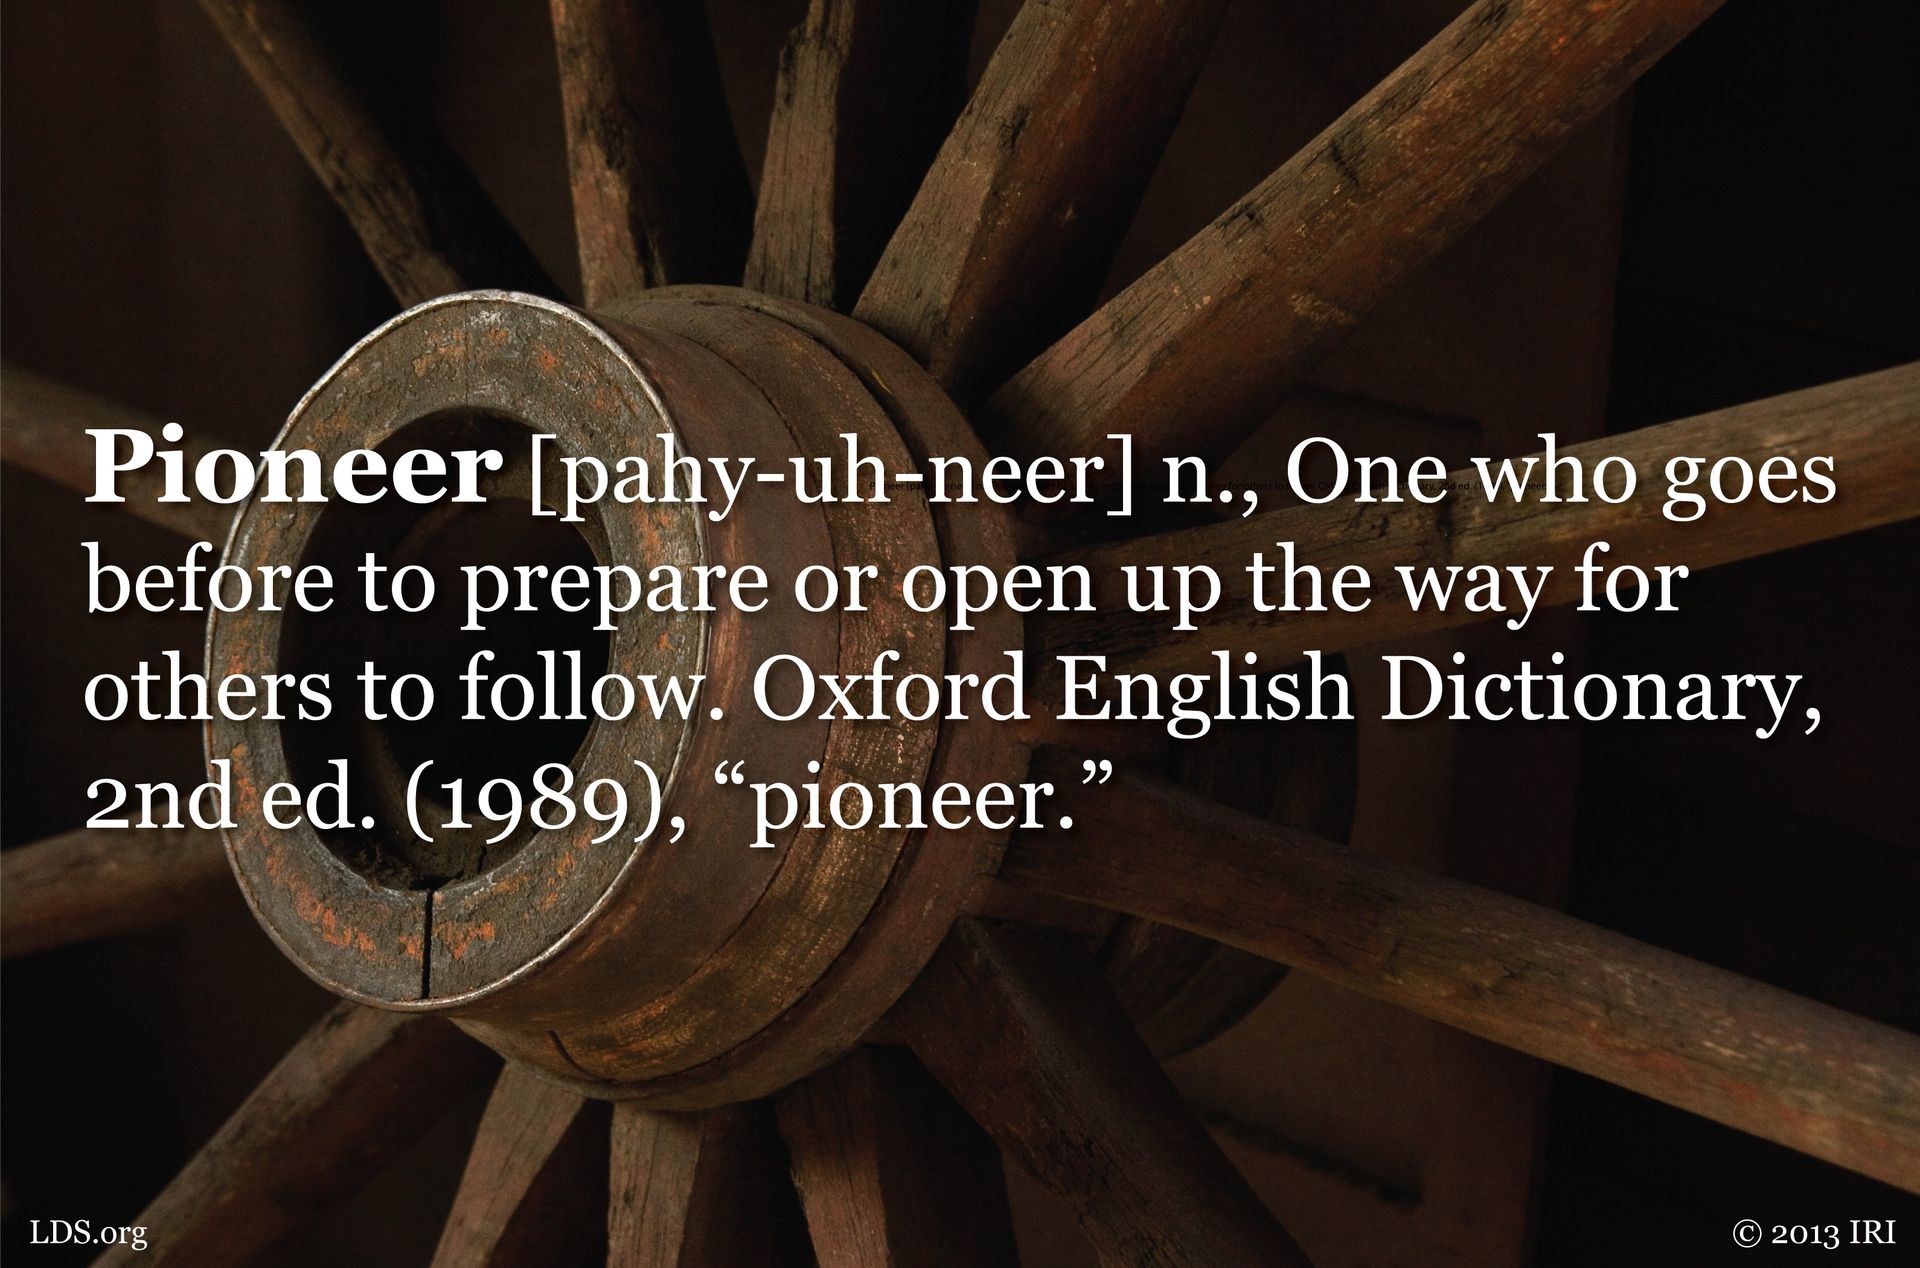 “Pioneer [pahy-uh-neer] n., One who goes before to prepare or open up the way for others to follow.”—Oxford English Dictionary, 2nd ed. (1989), “Pioneer” © undefined ipCode 1.